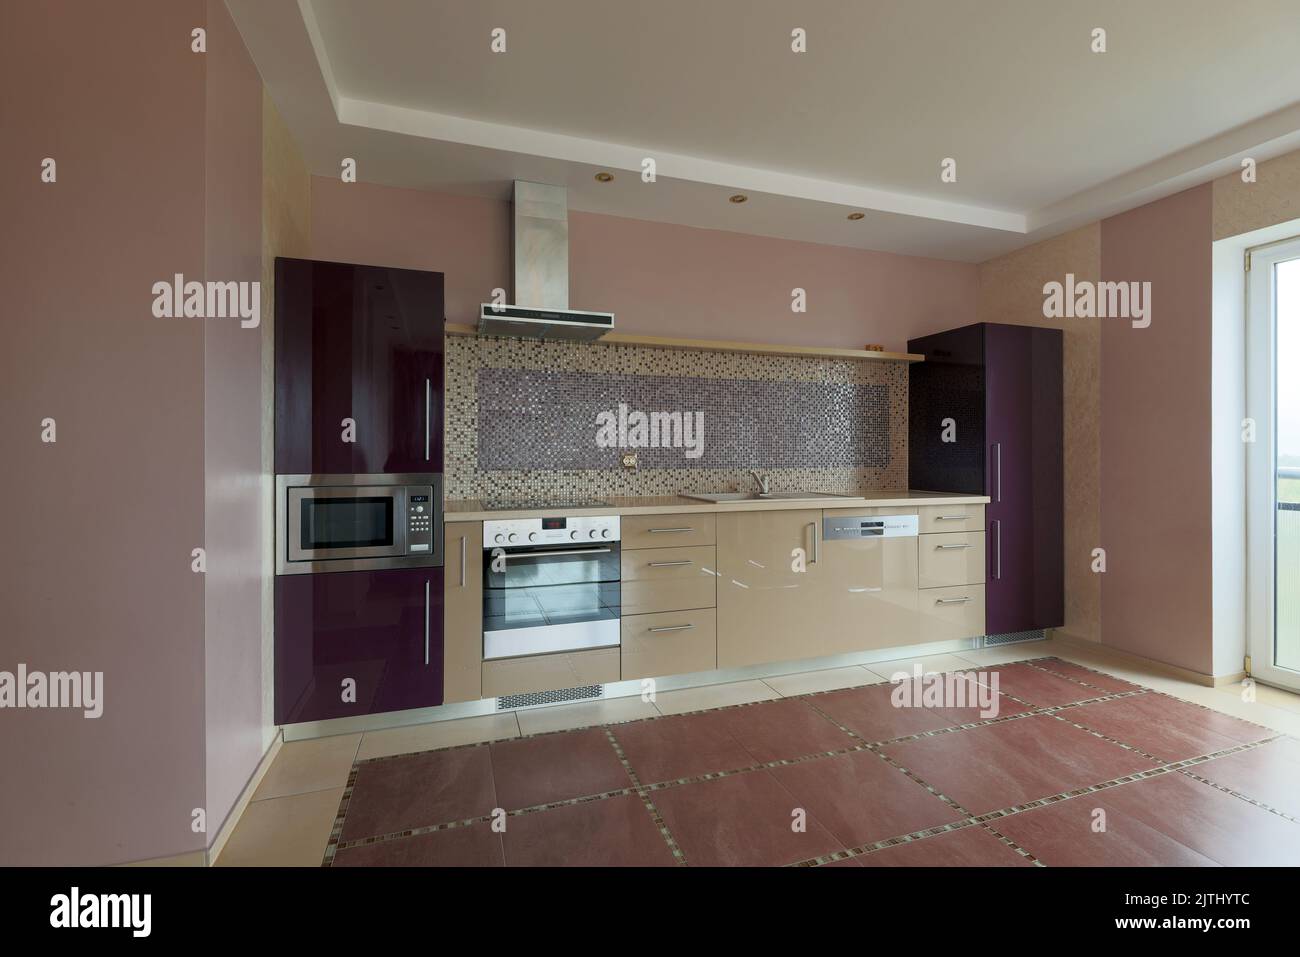 interior view of a beige and purple domestic kitchen furniture with appliances Stock Photo